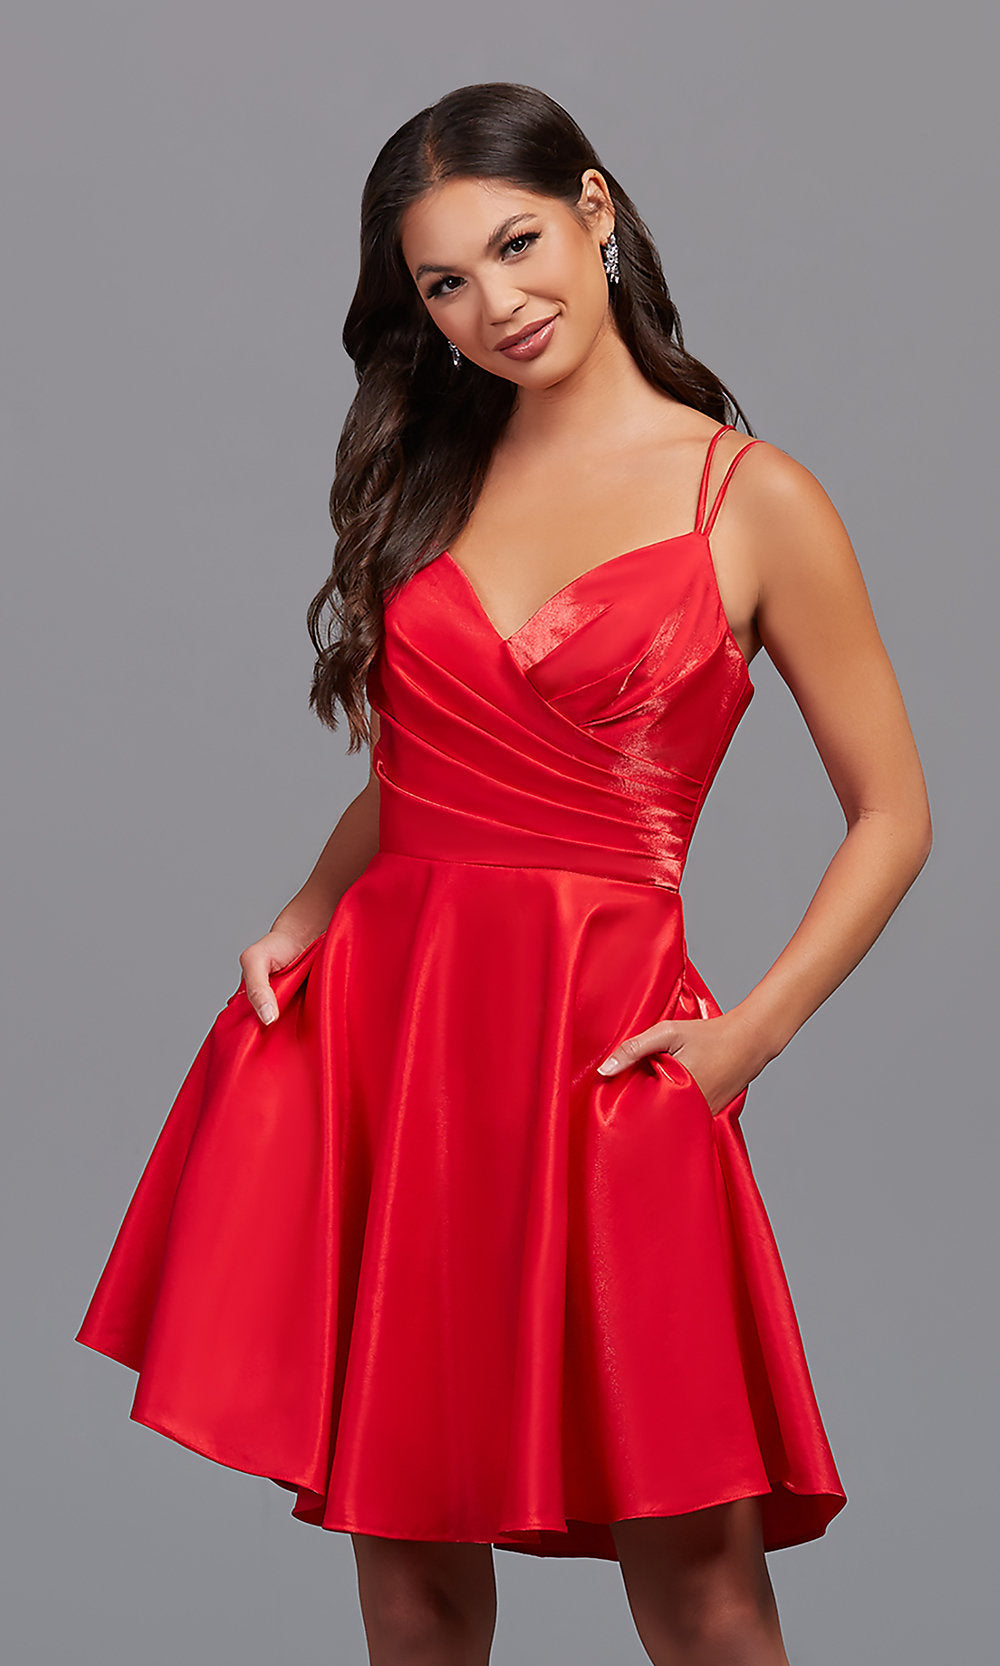 Rose Shimmer Strappy-Open-Back Short A-Line Homecoming Dress